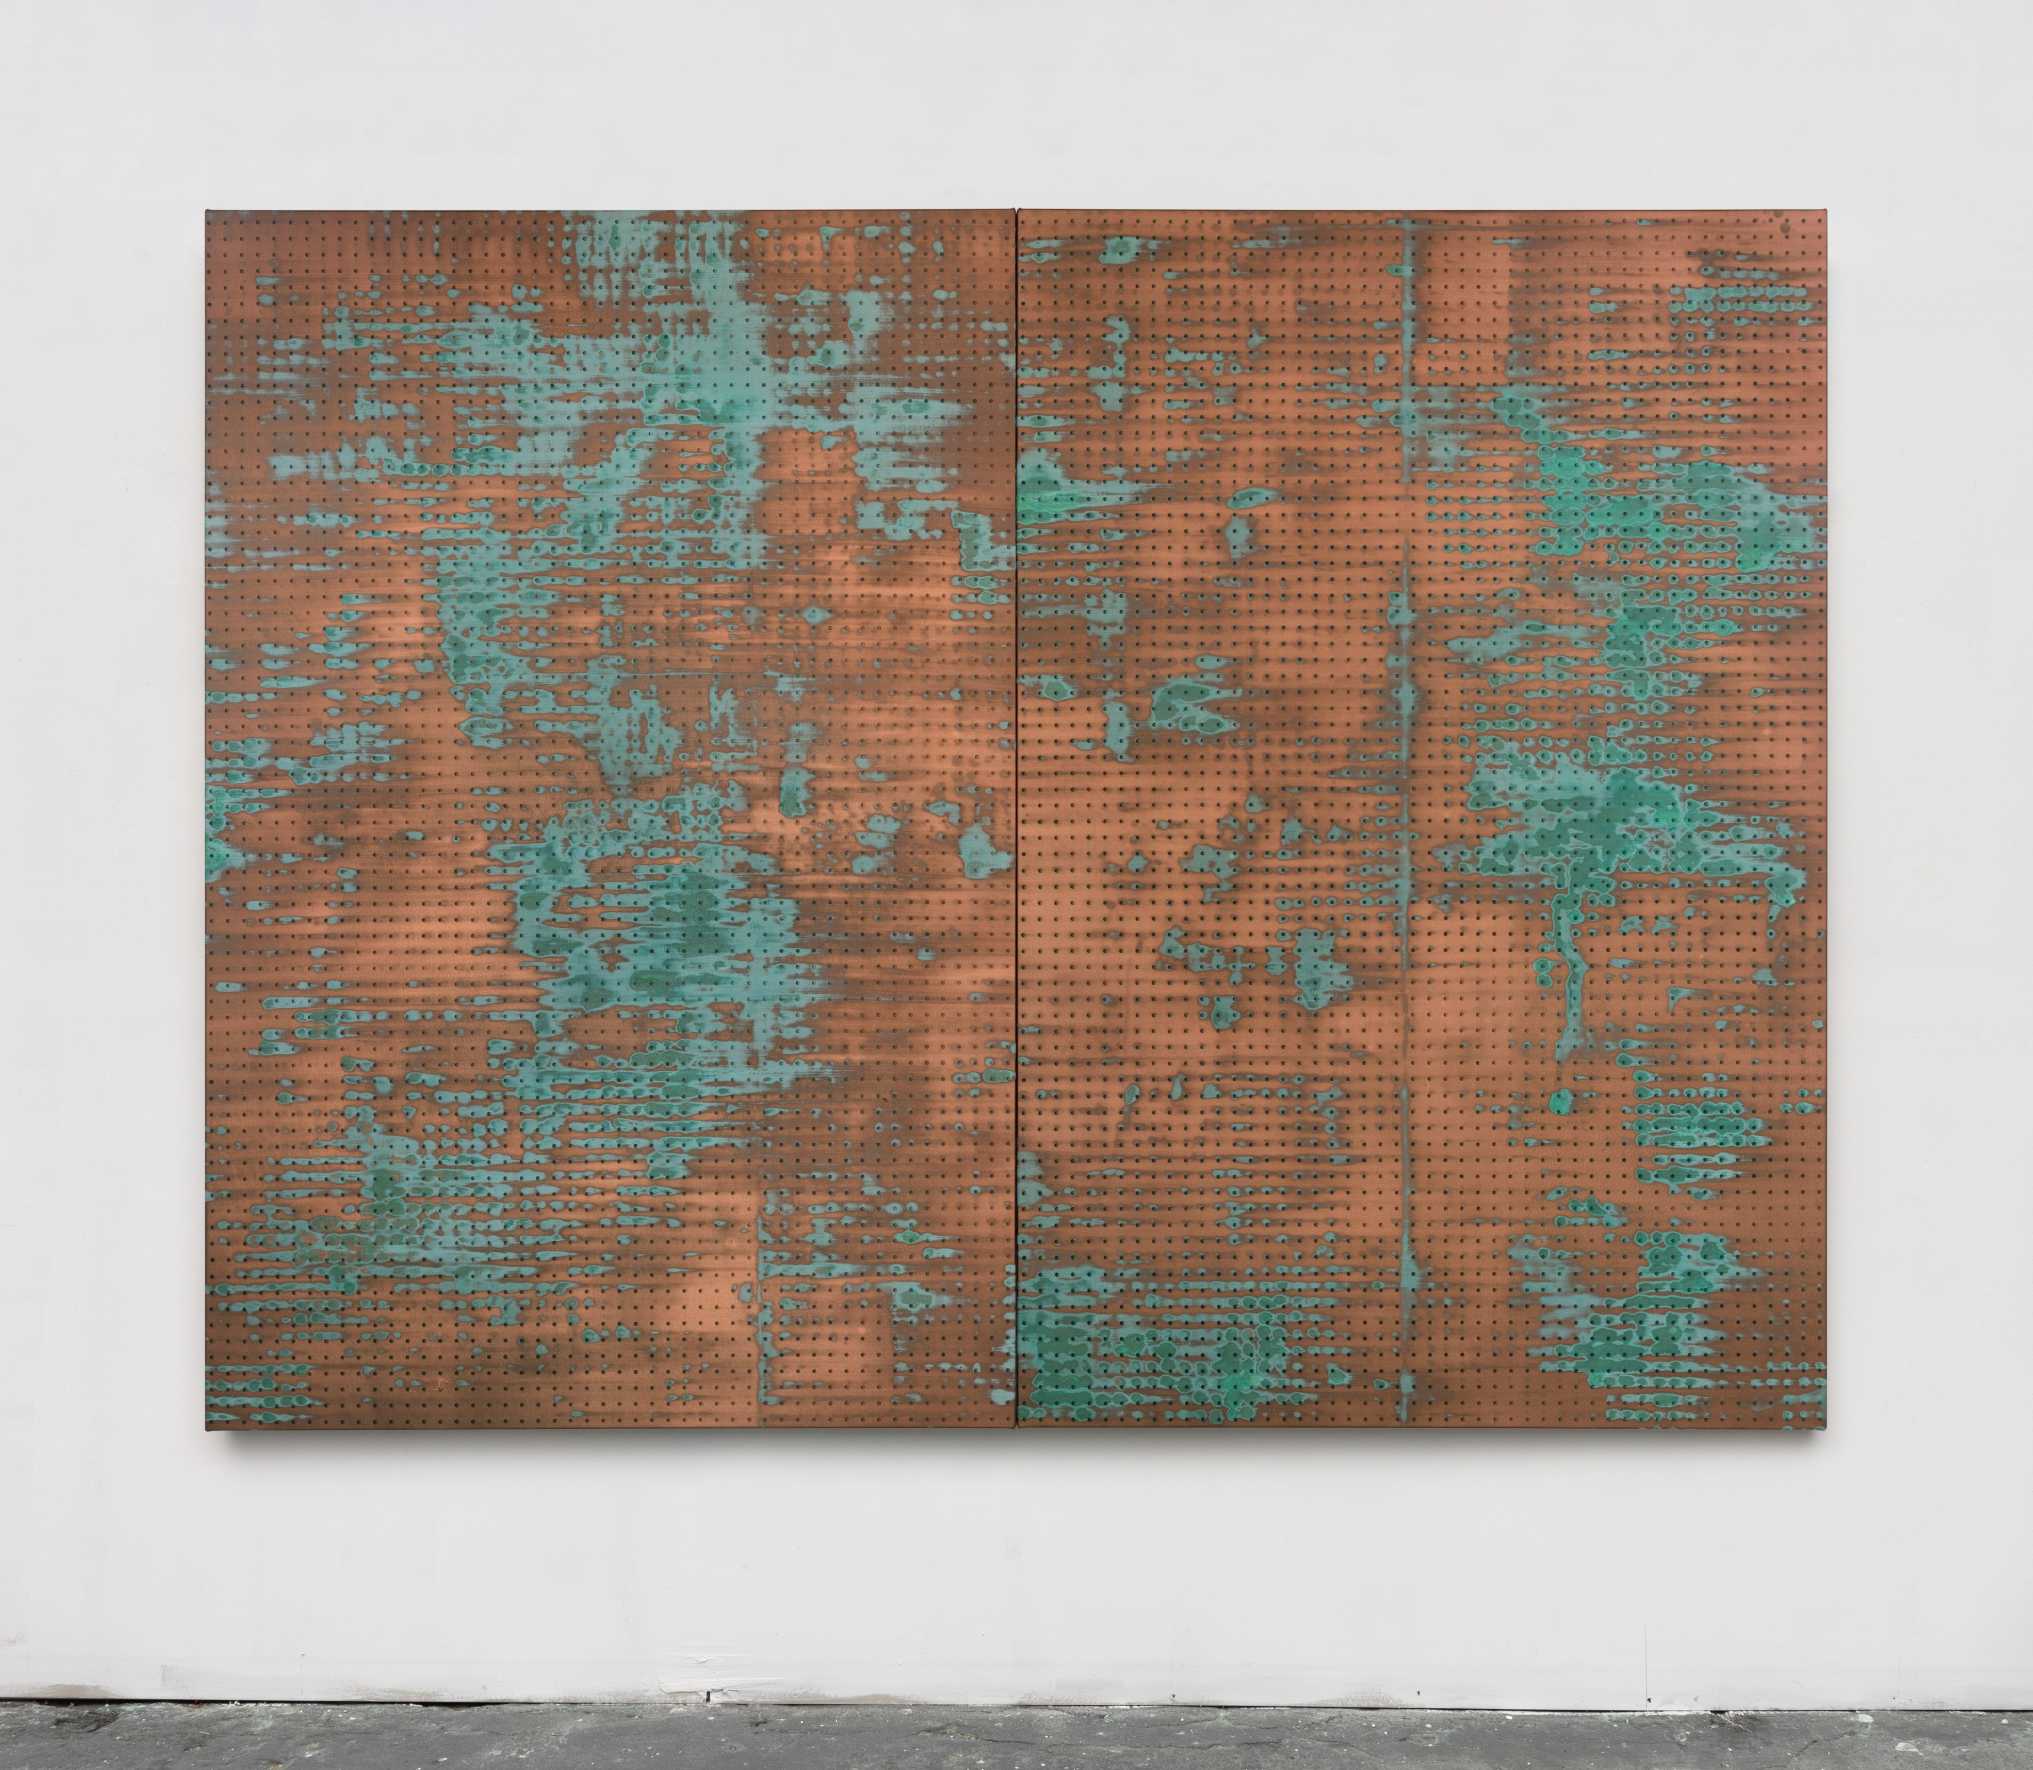 Copper metallic paint and dye oxide on canvas.